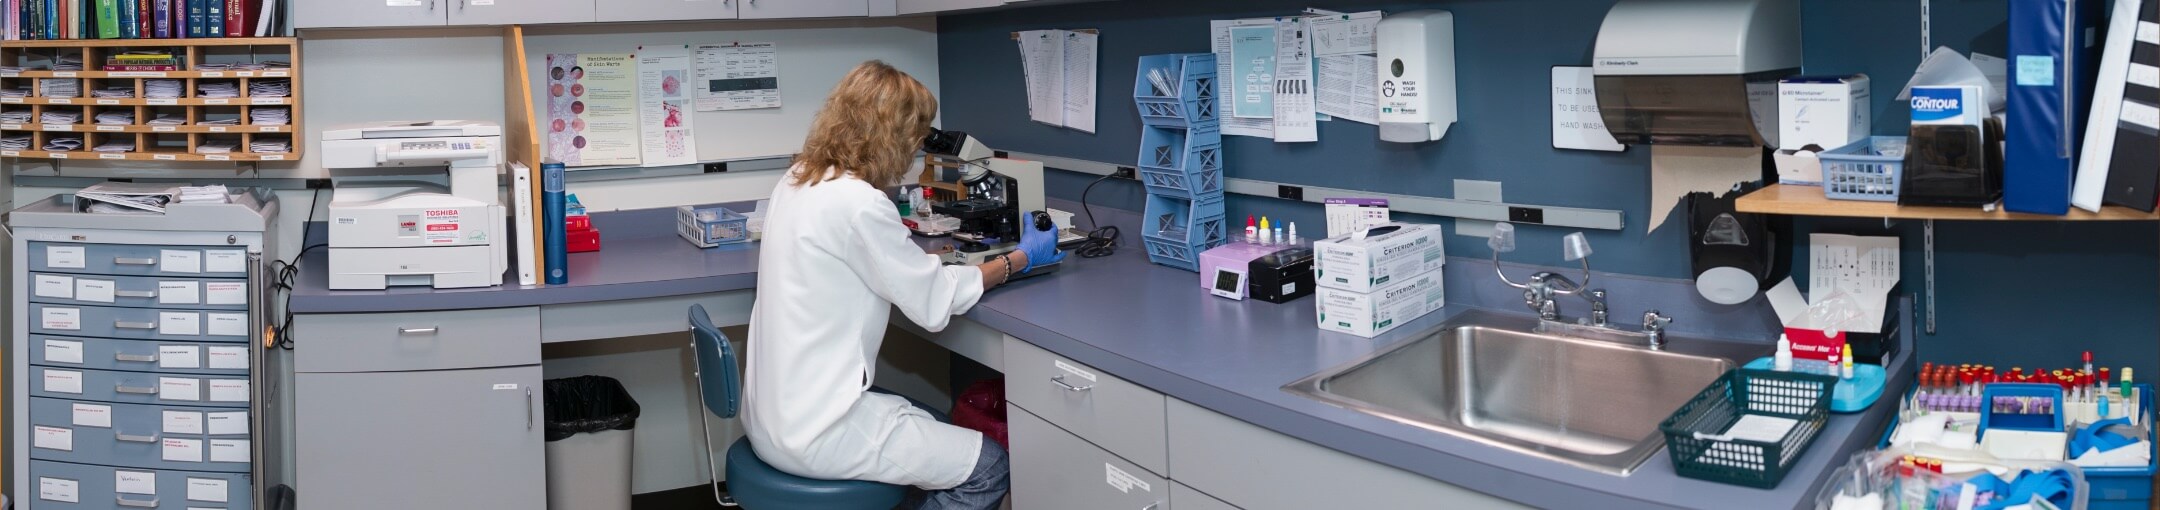 A lab technician looking at samples through a microscope in a lab.